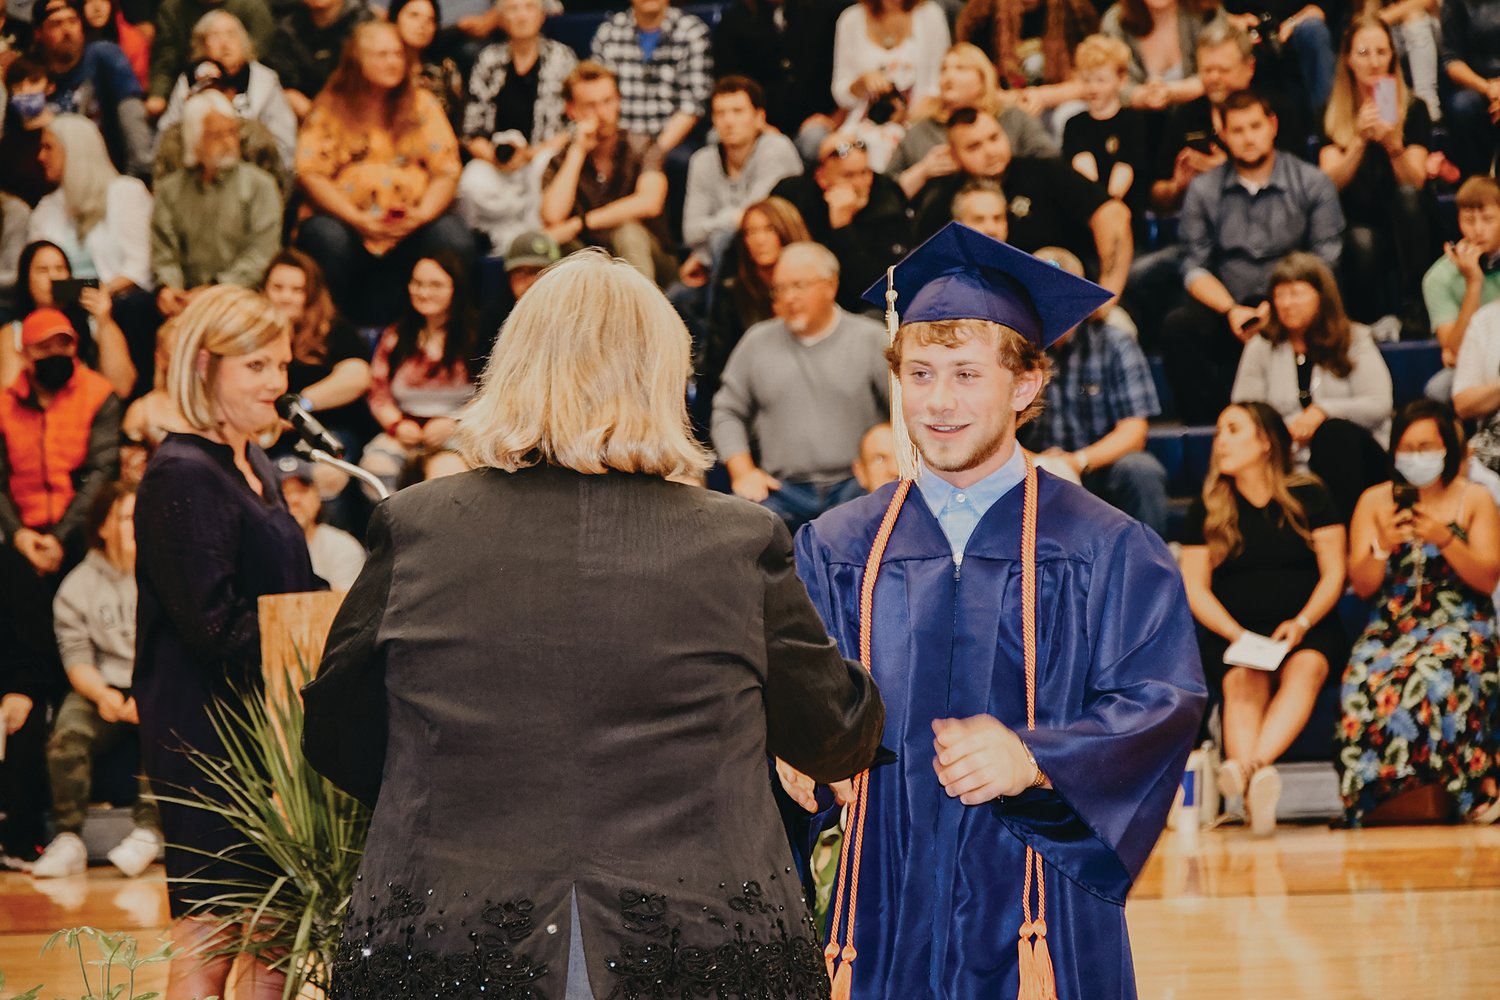 Brent Myers receives his diploma from Dr. Tania Grimes on Friday during commencement exercises at Fountain Central High School.